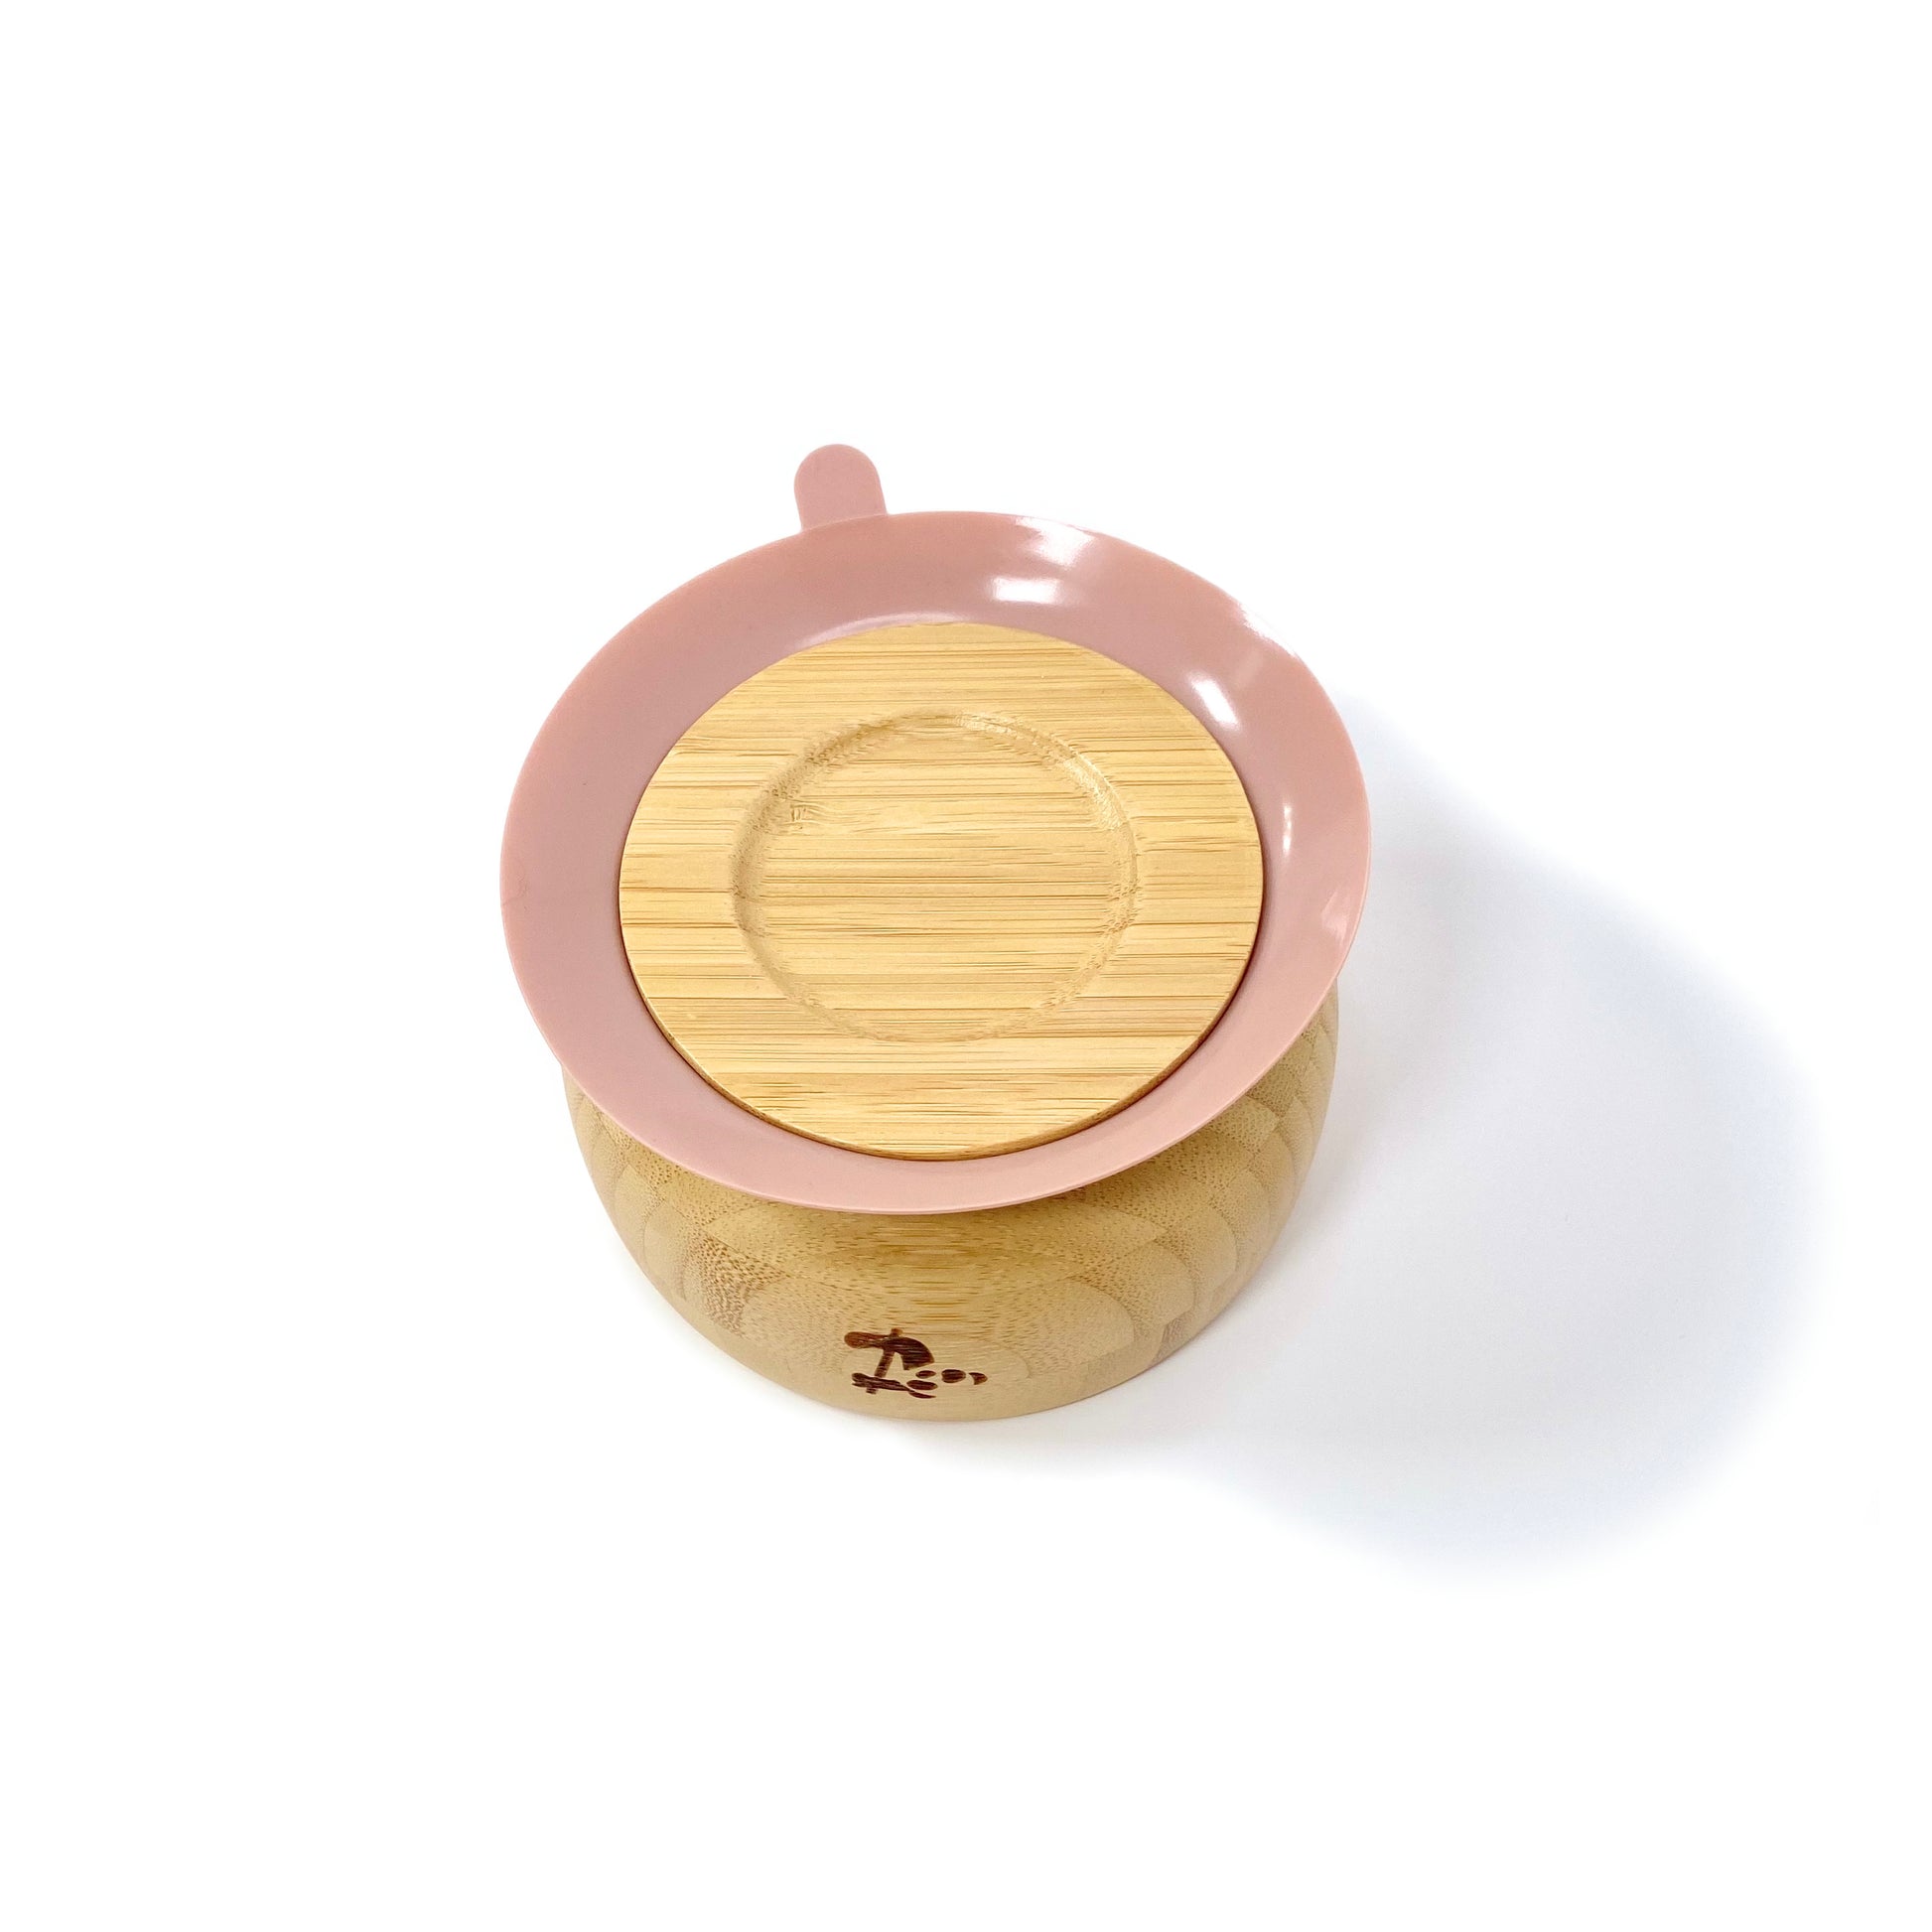 A children’s bamboo bowl with a blossom pink silicone suction ring. Image shows the underside of the bowl, featuring the silicone suction ring.